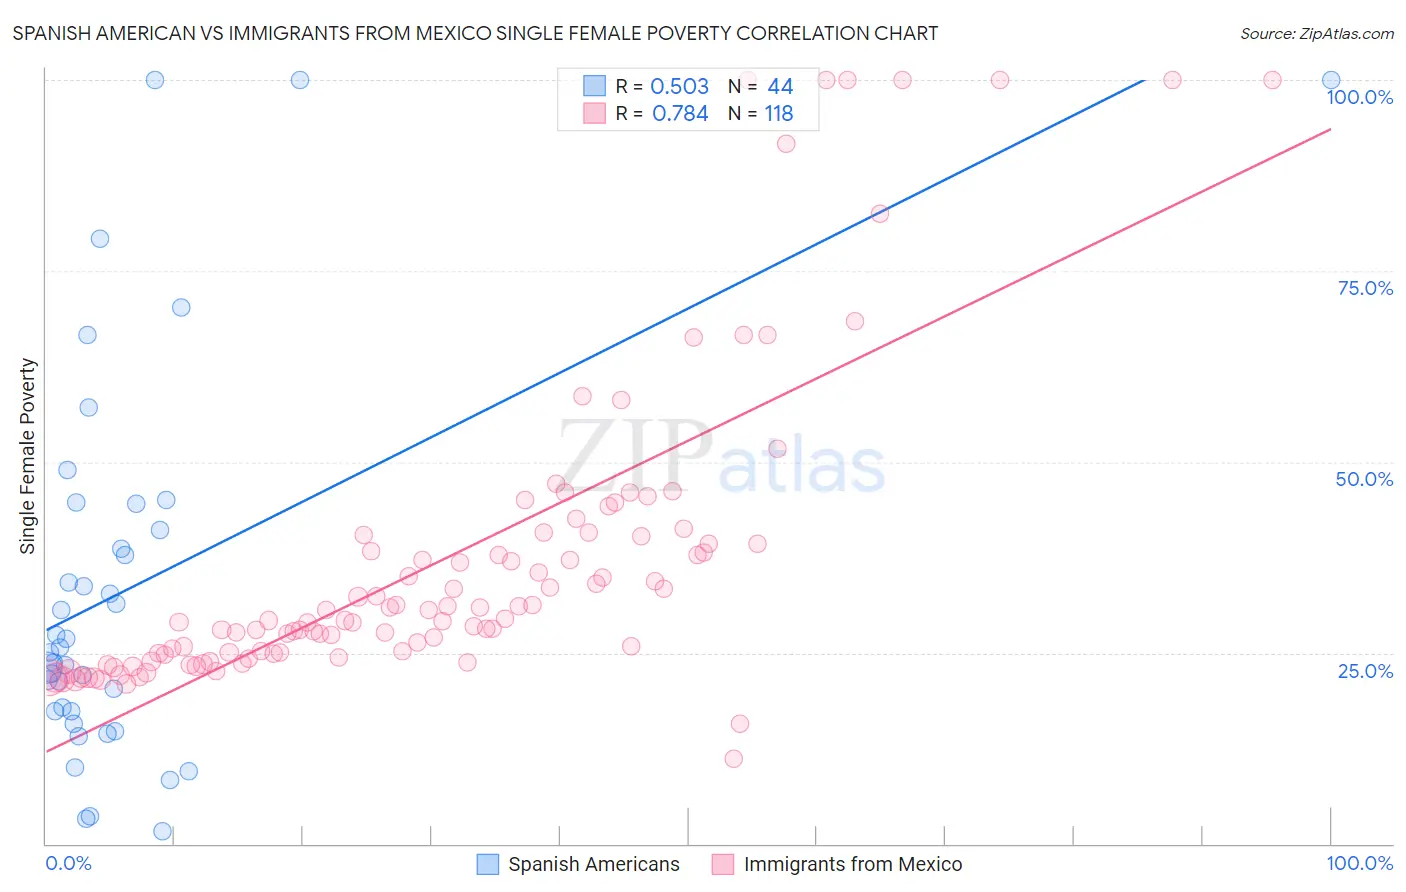 Spanish American vs Immigrants from Mexico Single Female Poverty